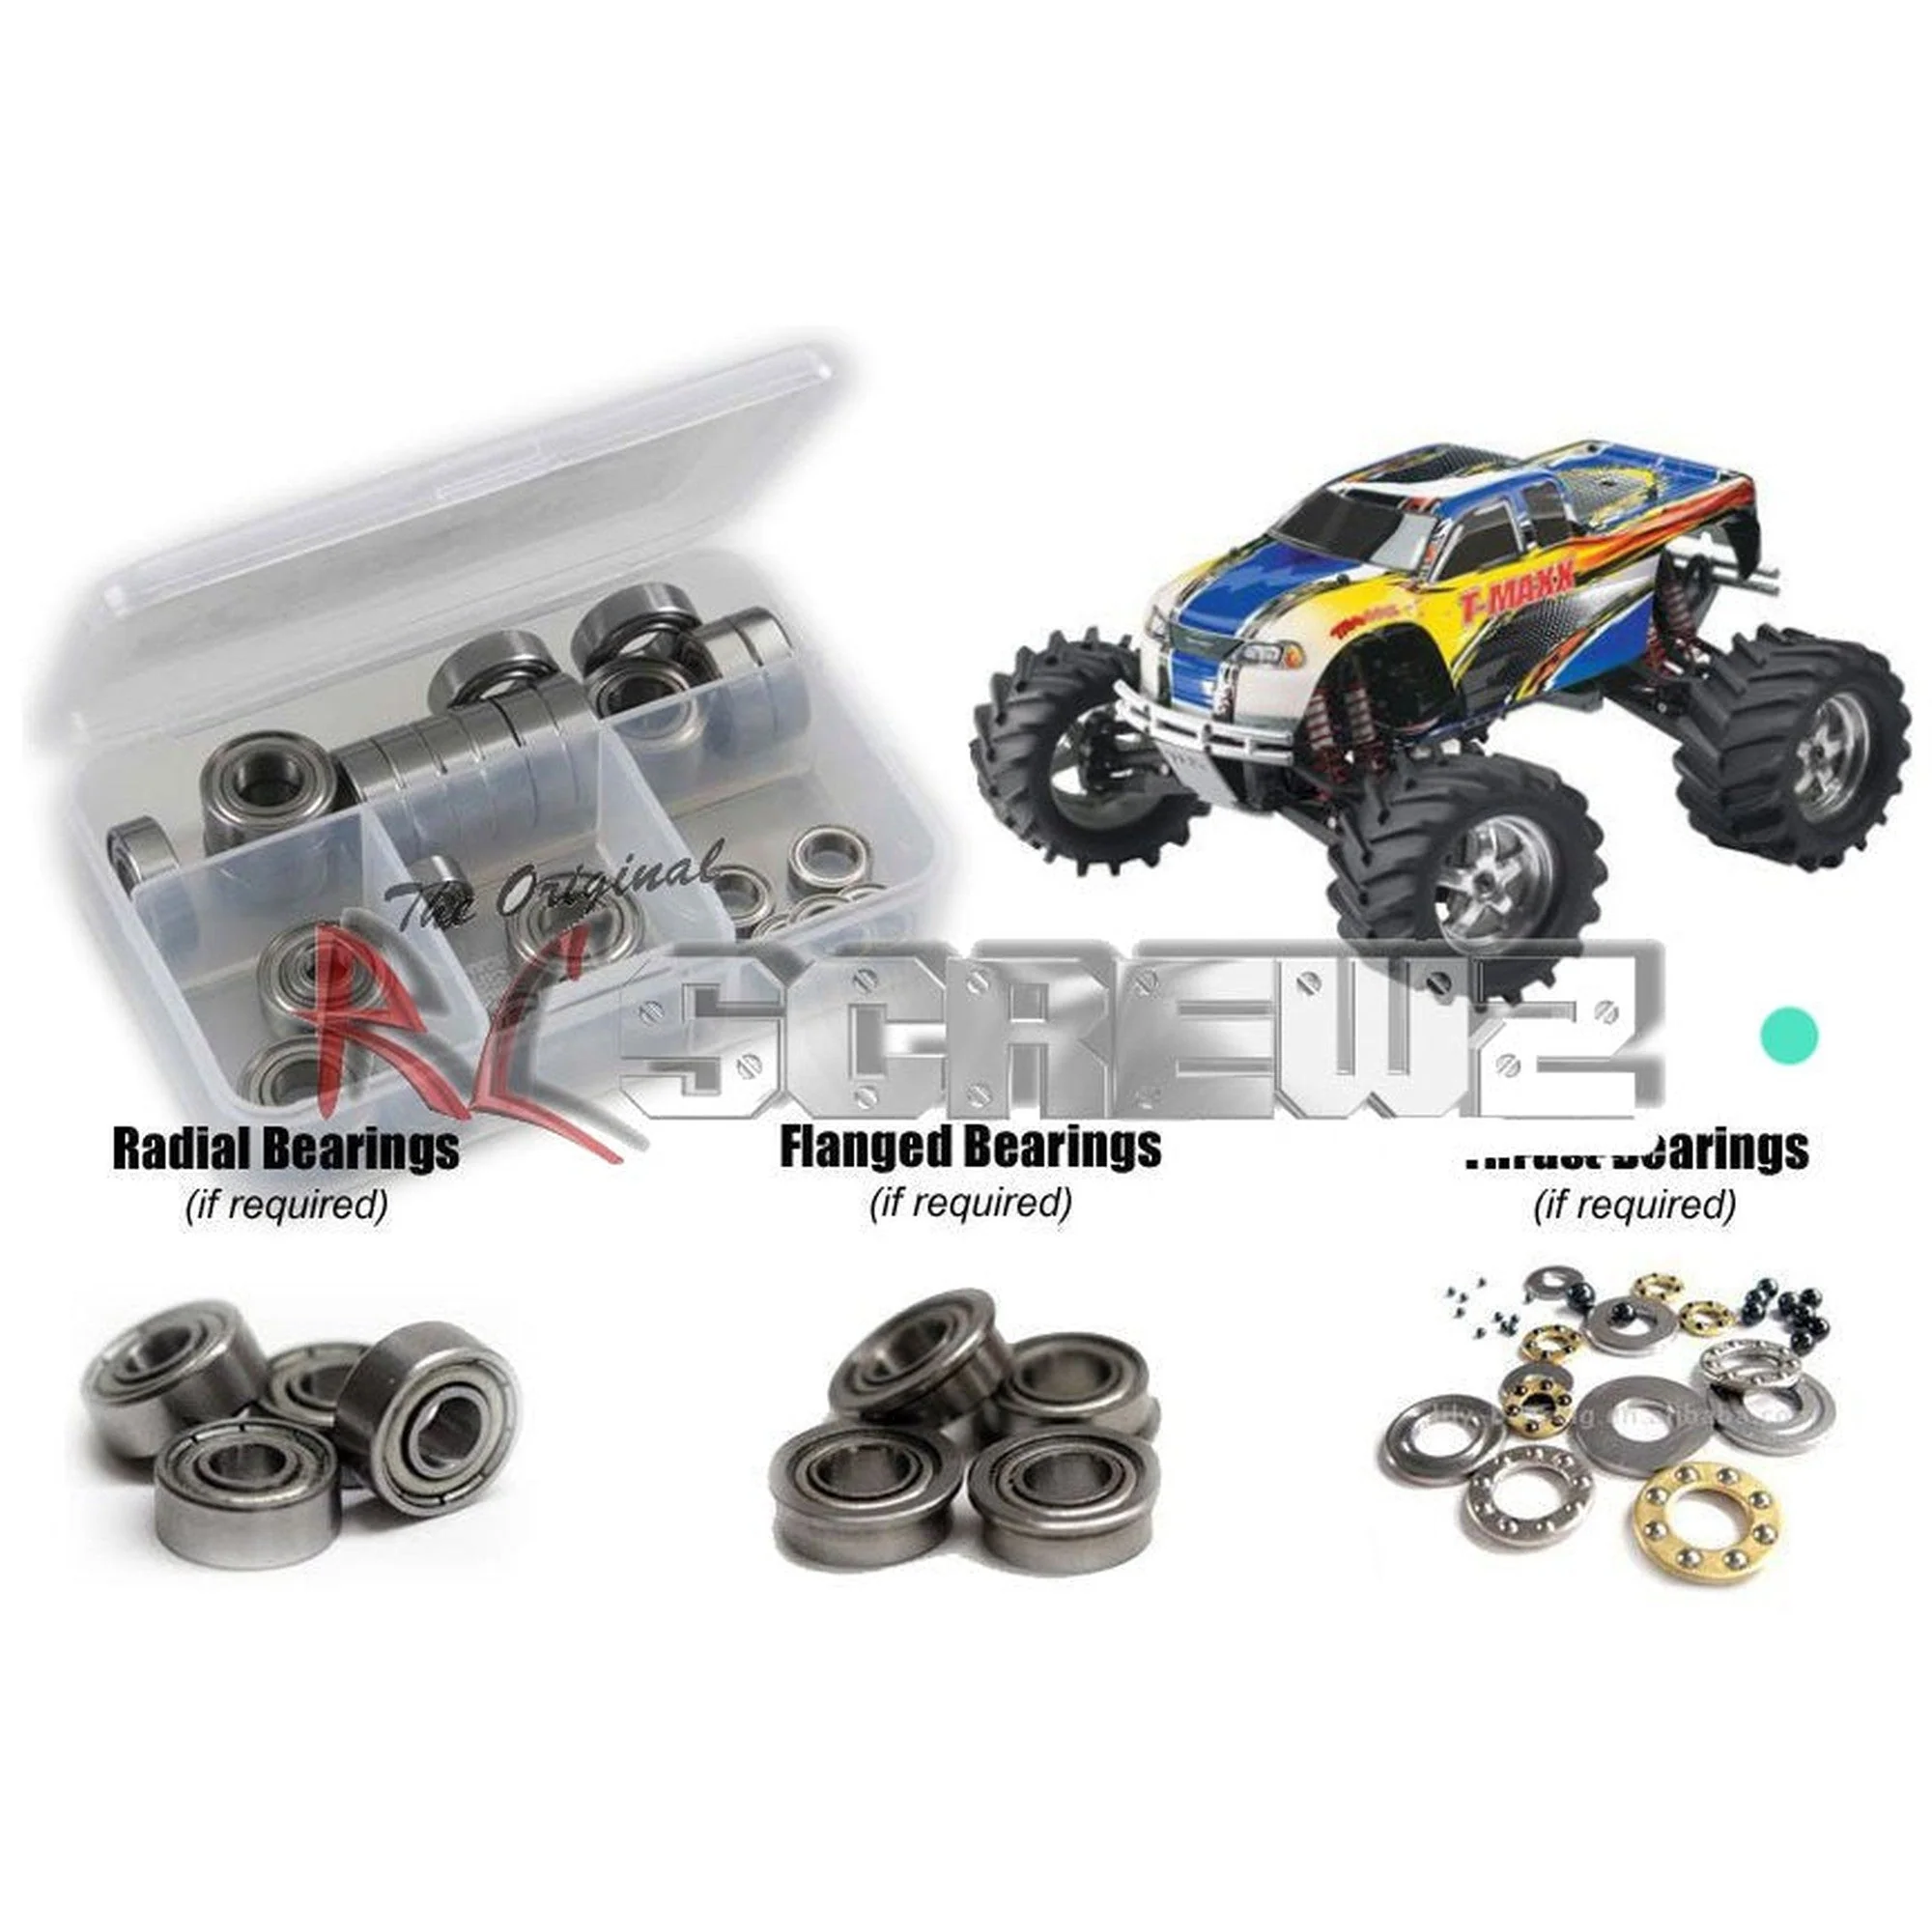 RCScrewZ Metal Shielded Bearing Kit tra009b for Traxxas T-Maxx 1.5 - Picture 1 of 12